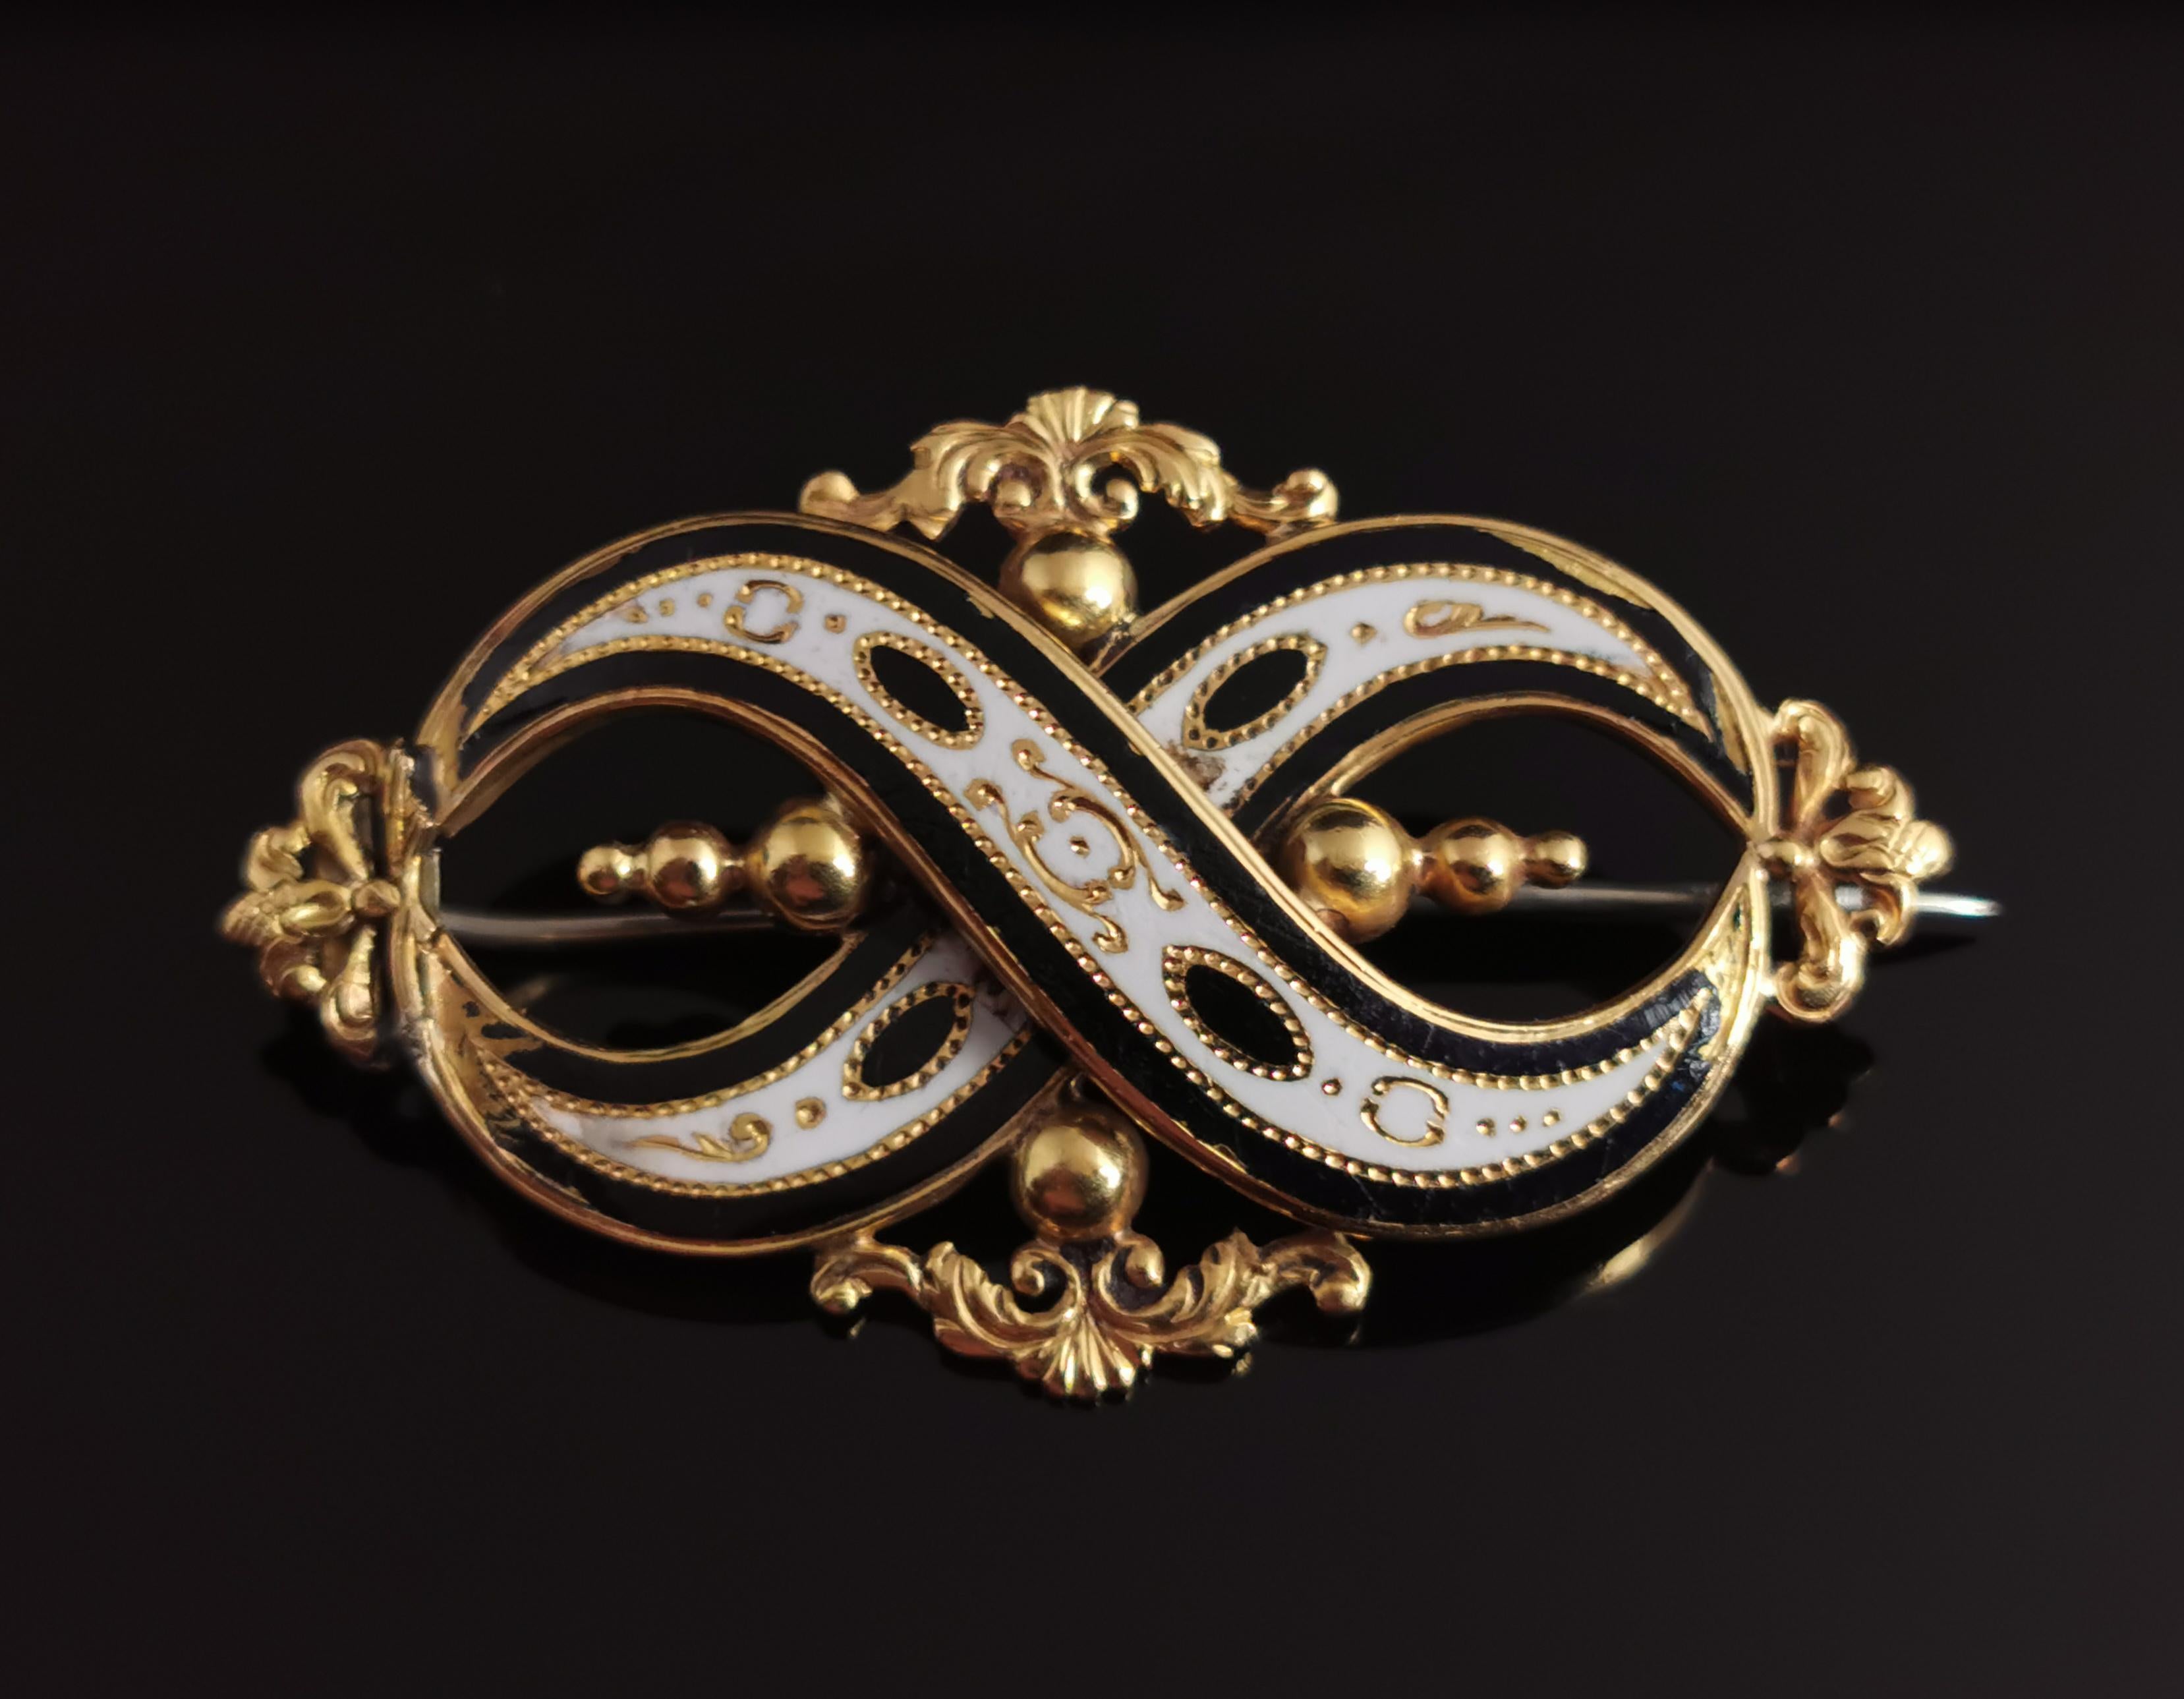 Antique Victorian Mourning Brooch, 15 Karat Yellow Gold, Black and White Enamel 6